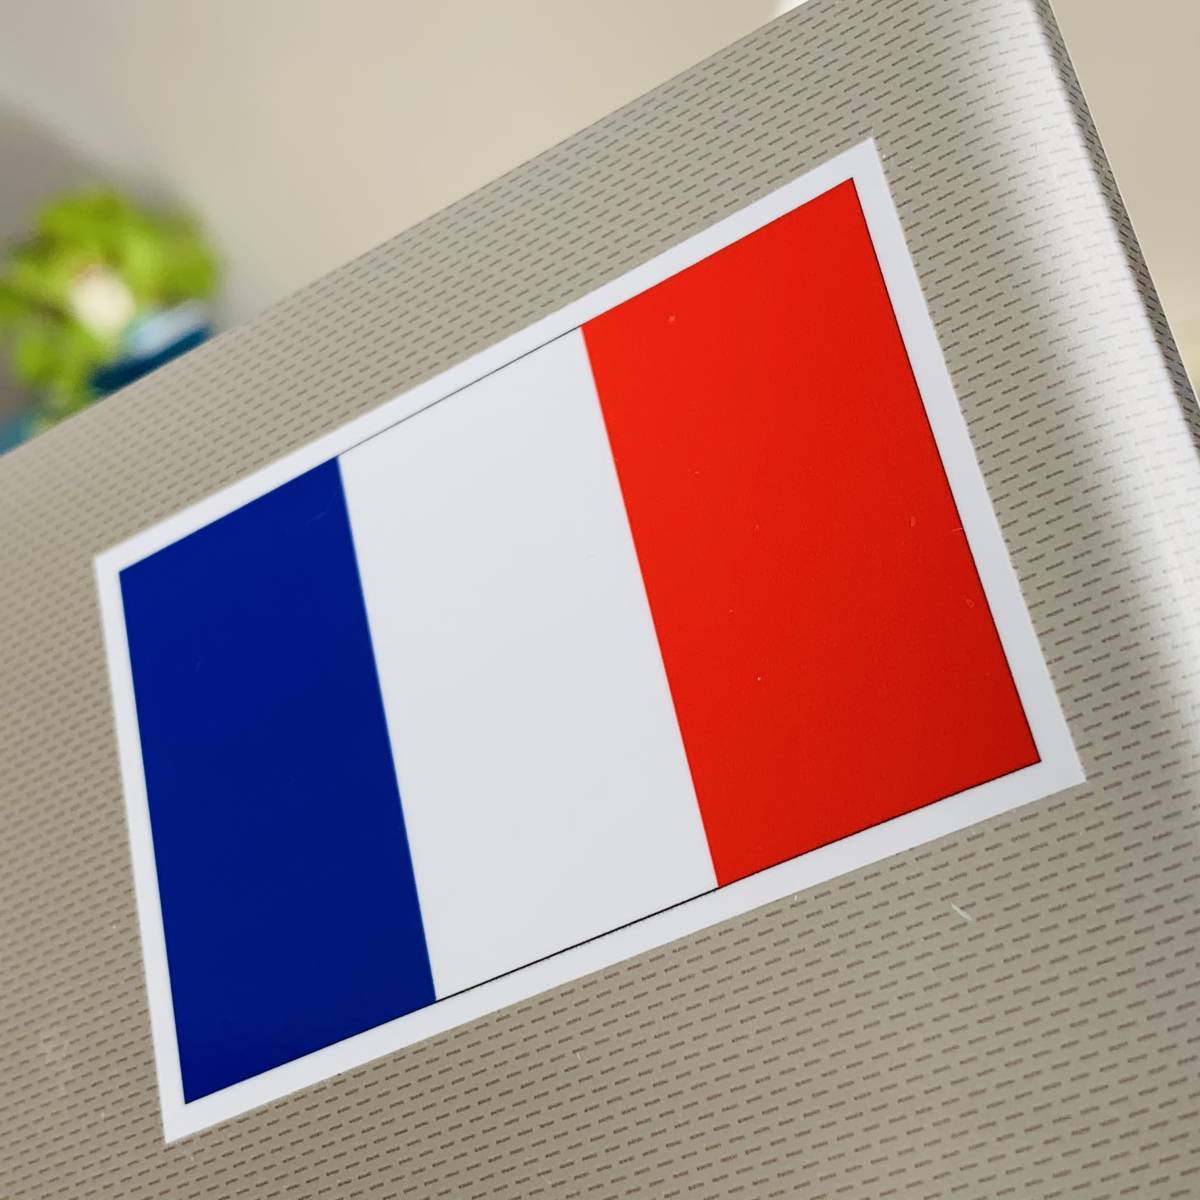 #_ France national flag sticker S size 5x7.5cm 2 pieces set #France Flag sticker tricolor immediately buying water-proof seal Kangoo Lutecia .EU